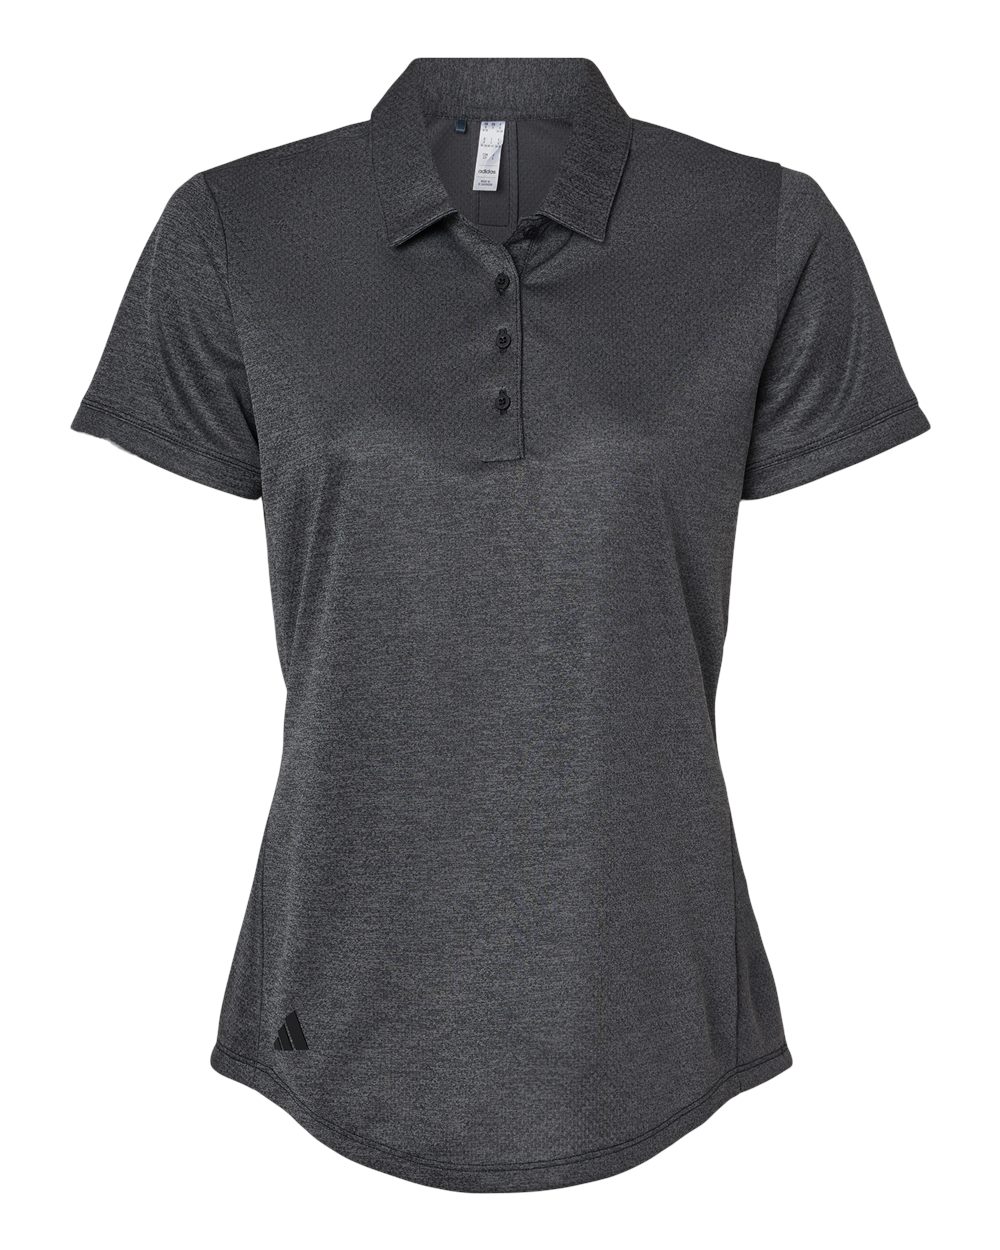 Adidas Women's Space Dyed Polo A592 #color_Black Melange